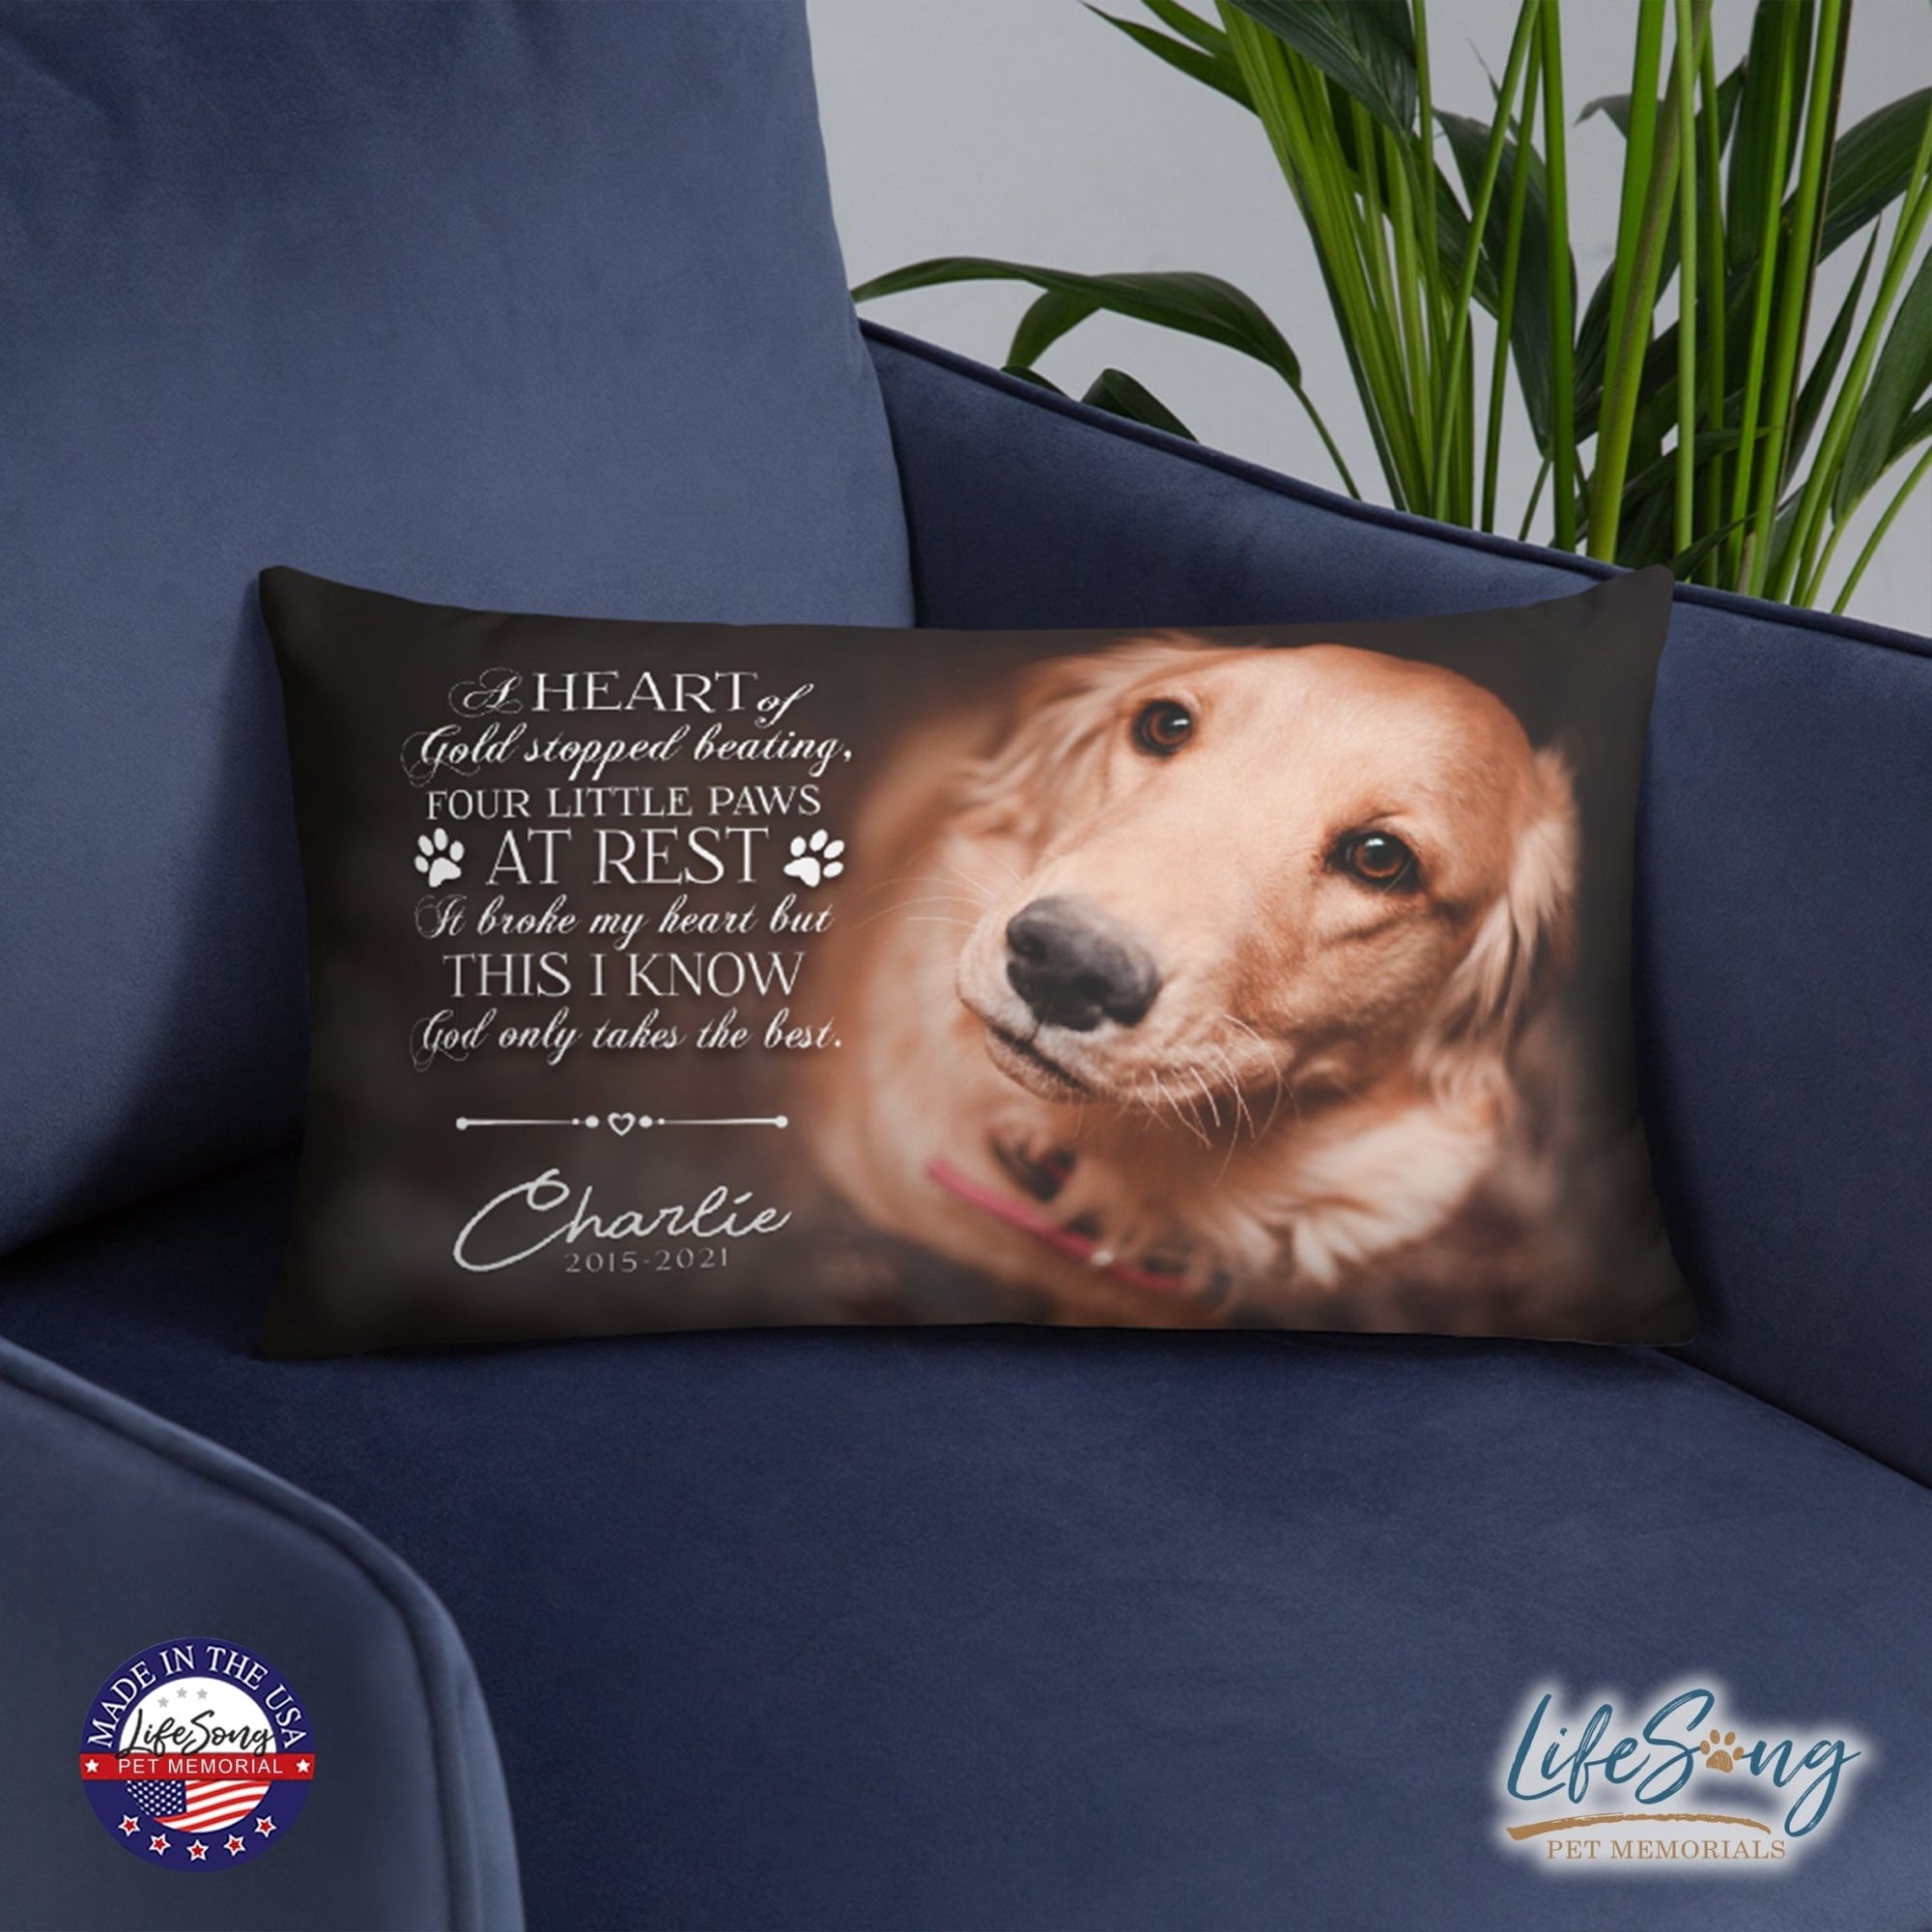 Personalized Pet Memorial Printed Throw Pillow - A Heart of Gold - LifeSong Milestones